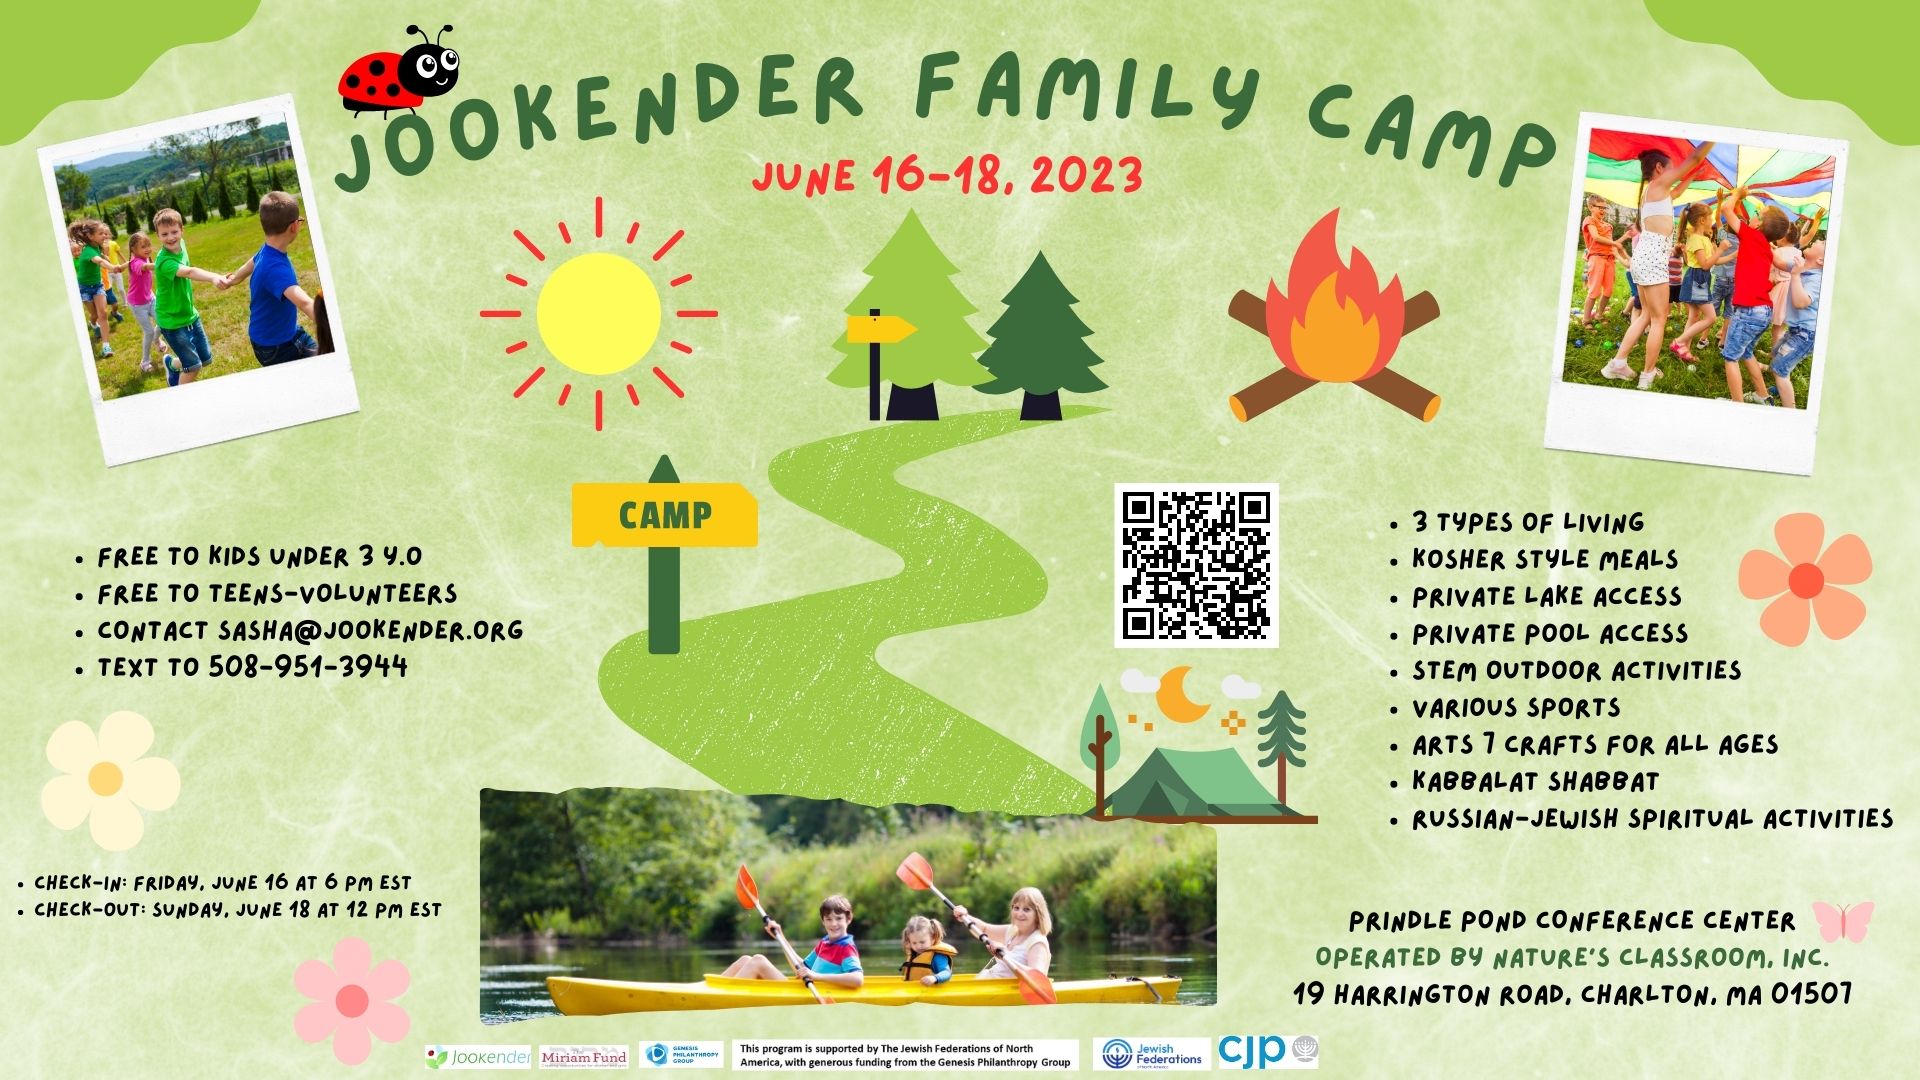 Jookender Family Camp